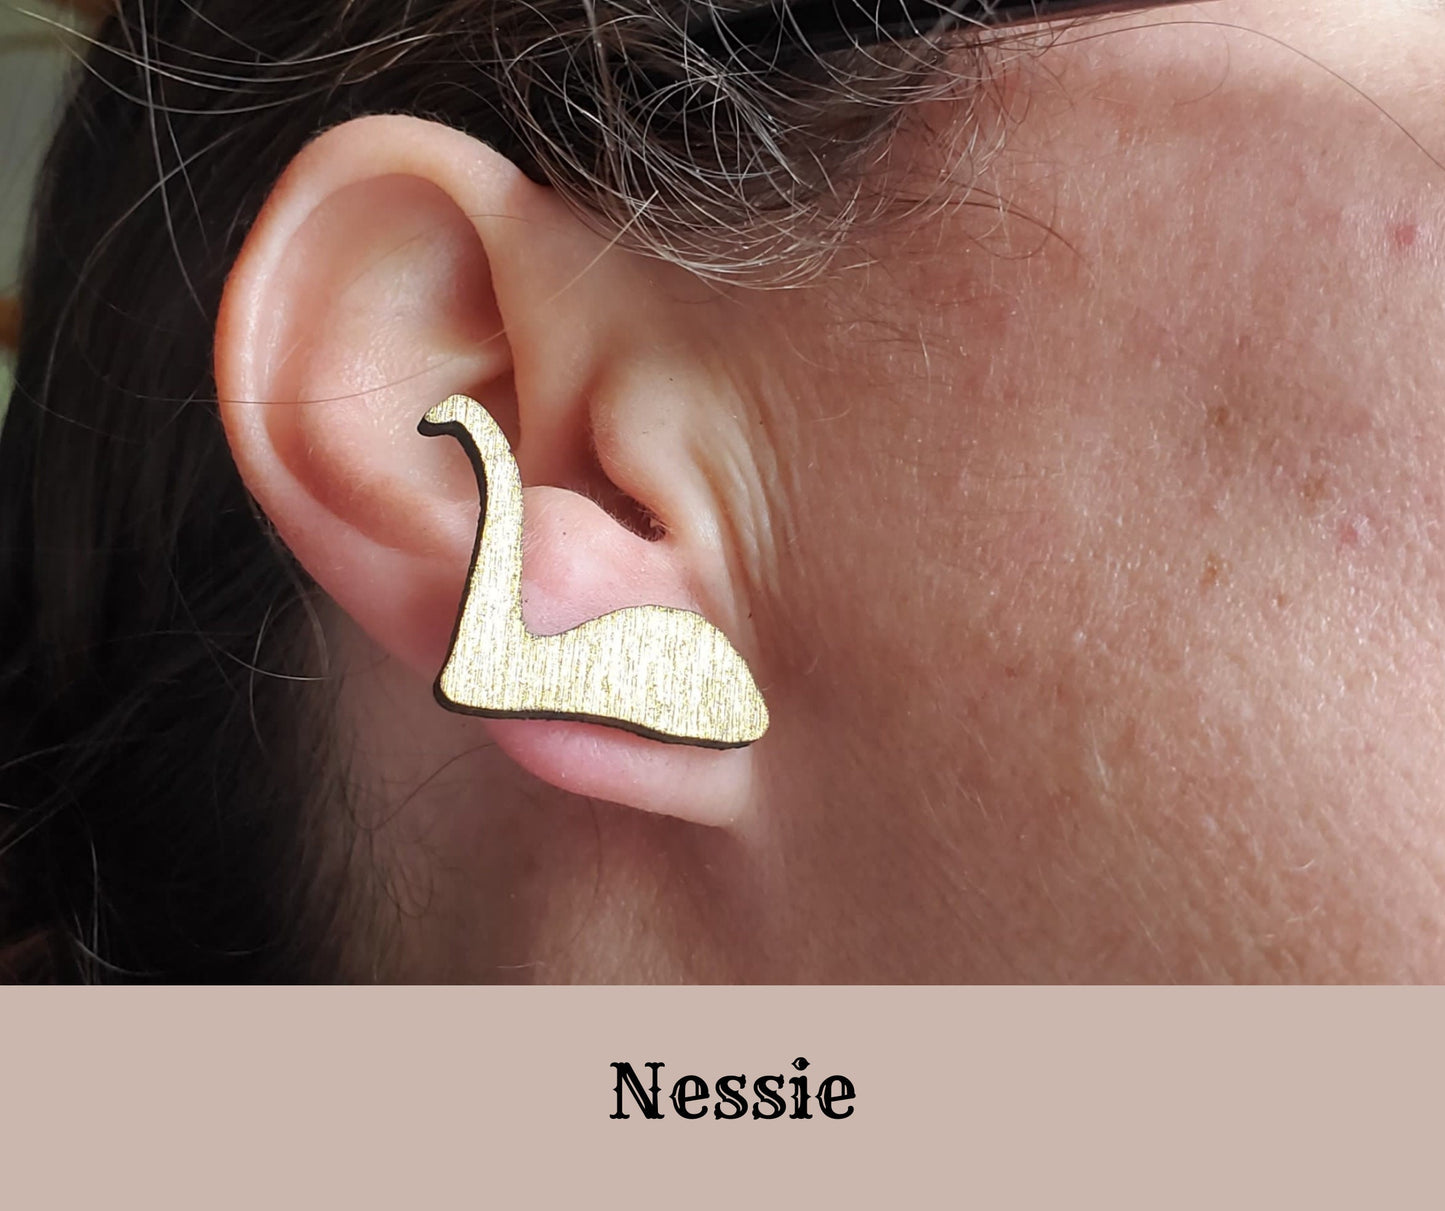 Loch Ness Monster Nessie Stud Earrings in either Black or Gold Lord and Lady Towers